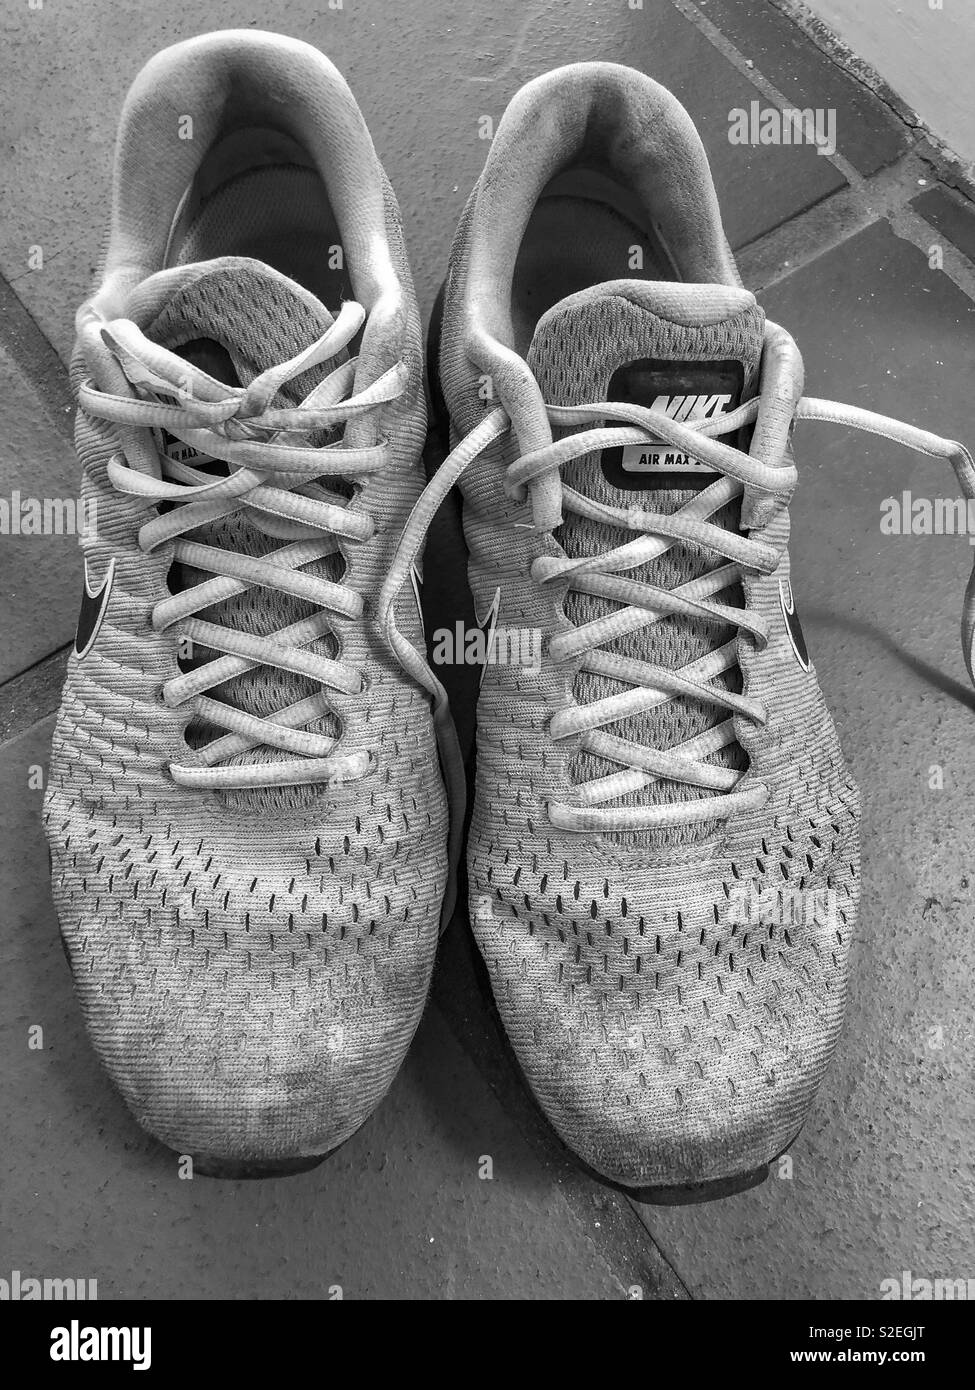 Trainers Black and White Stock Photos & Images - Alamy